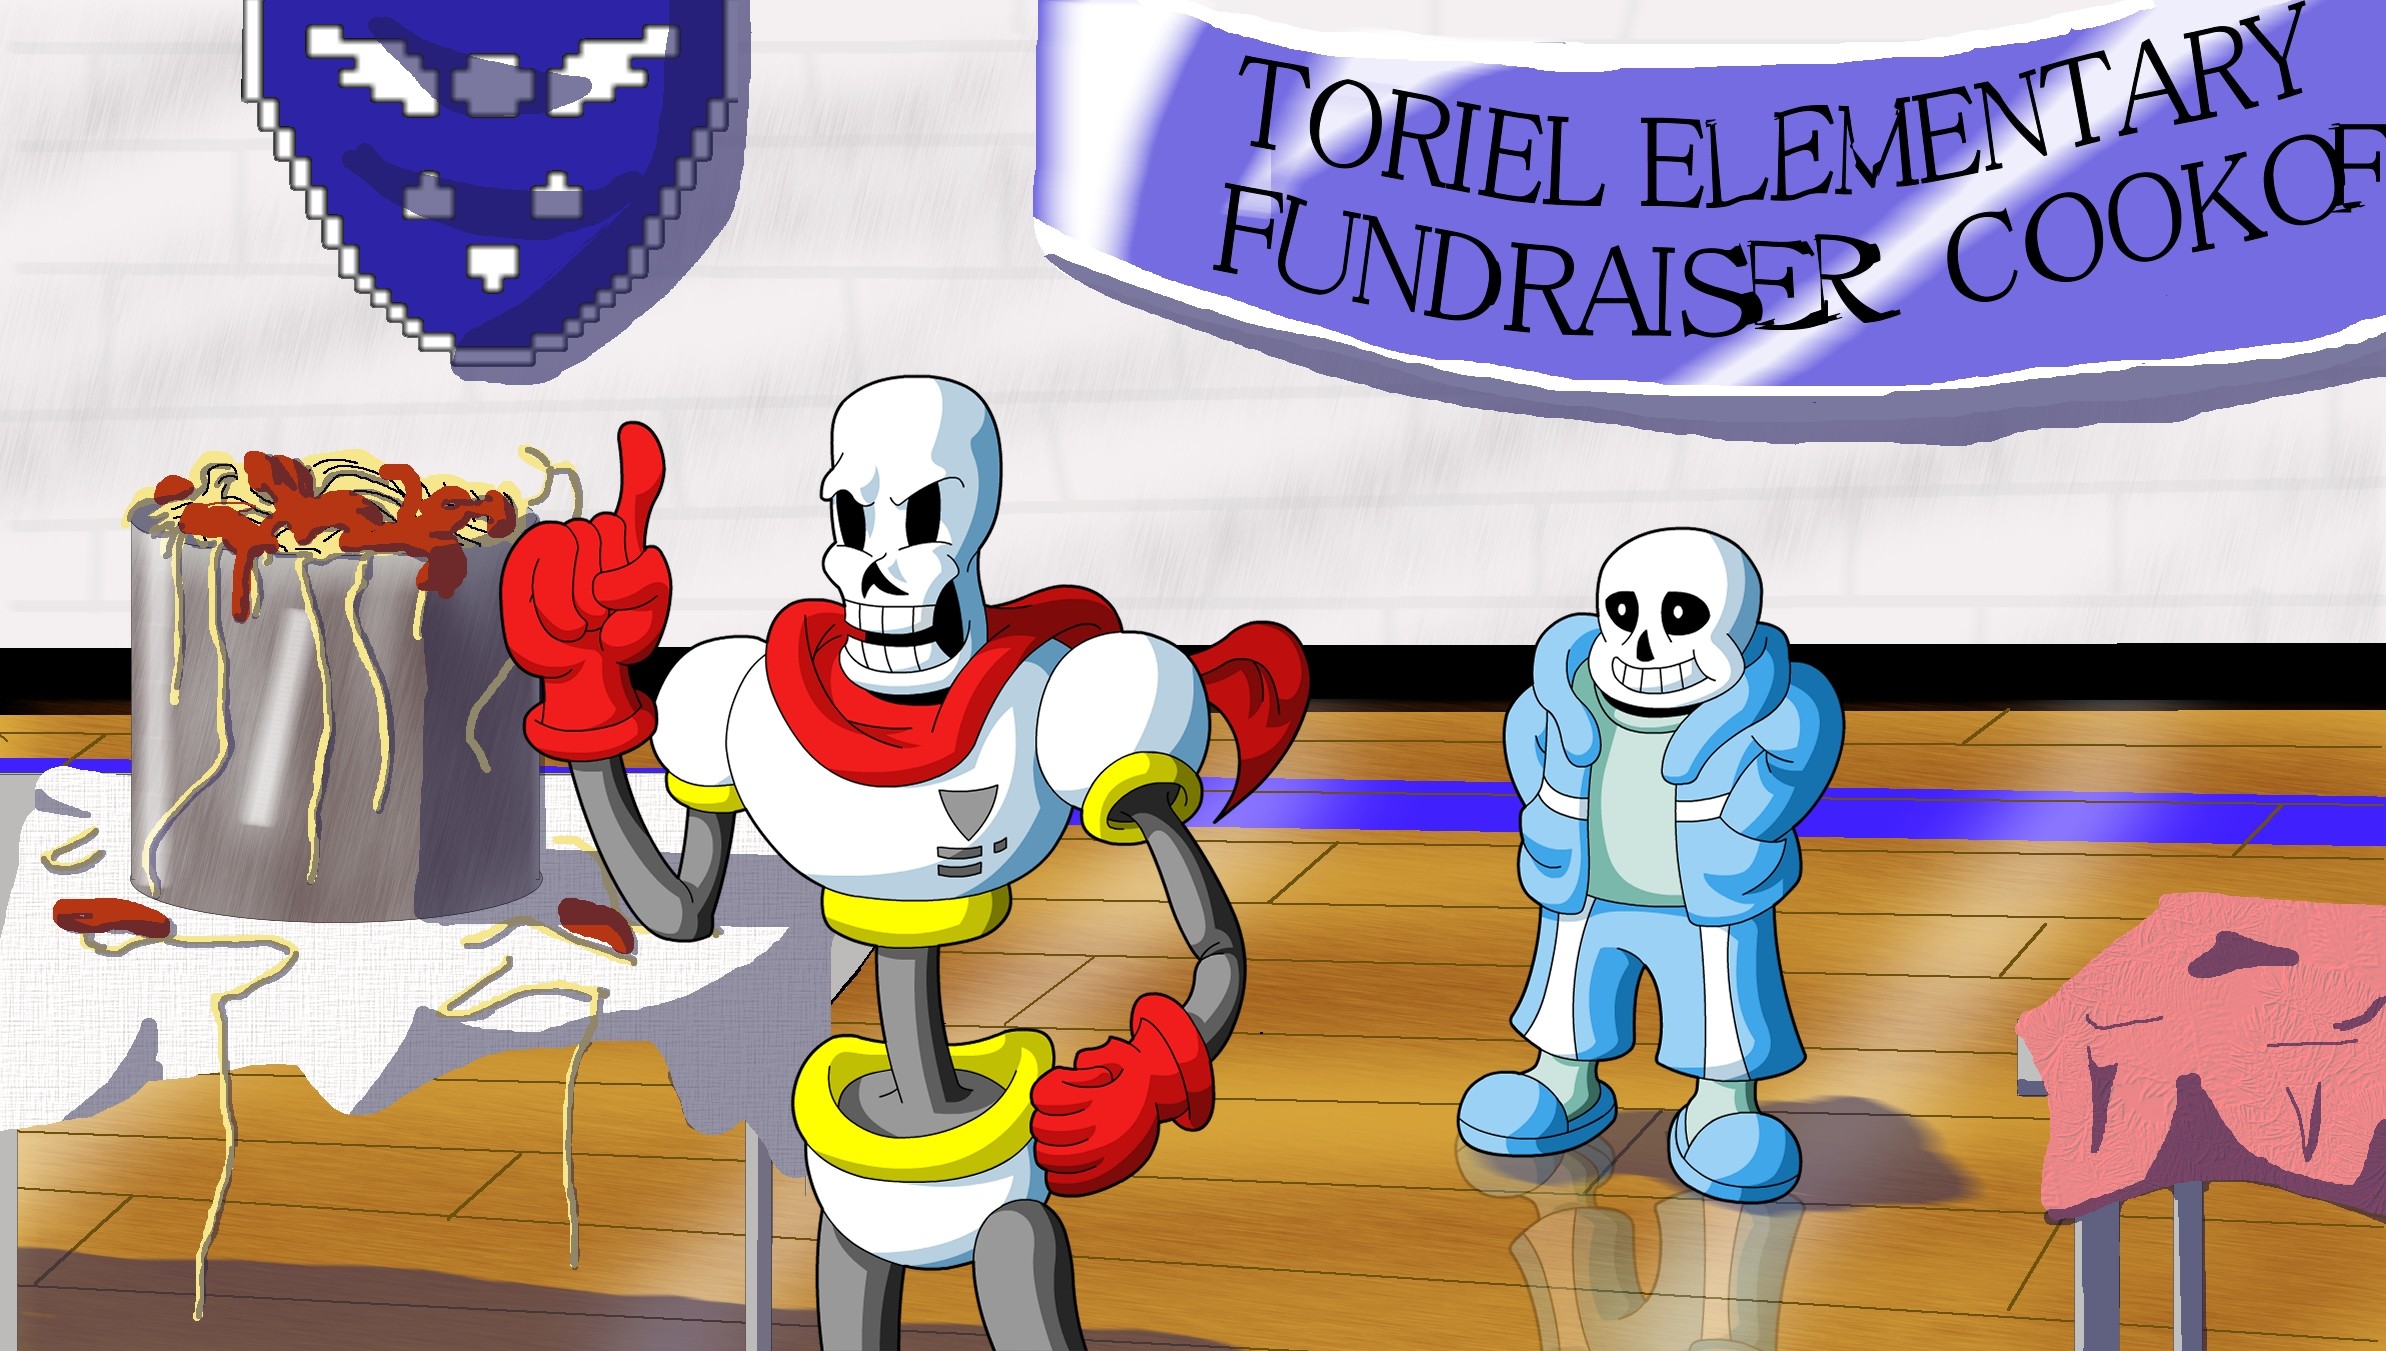 2386x1351 Sans and Papyrus: Helping Out...? by Clovis15 on DeviantArt